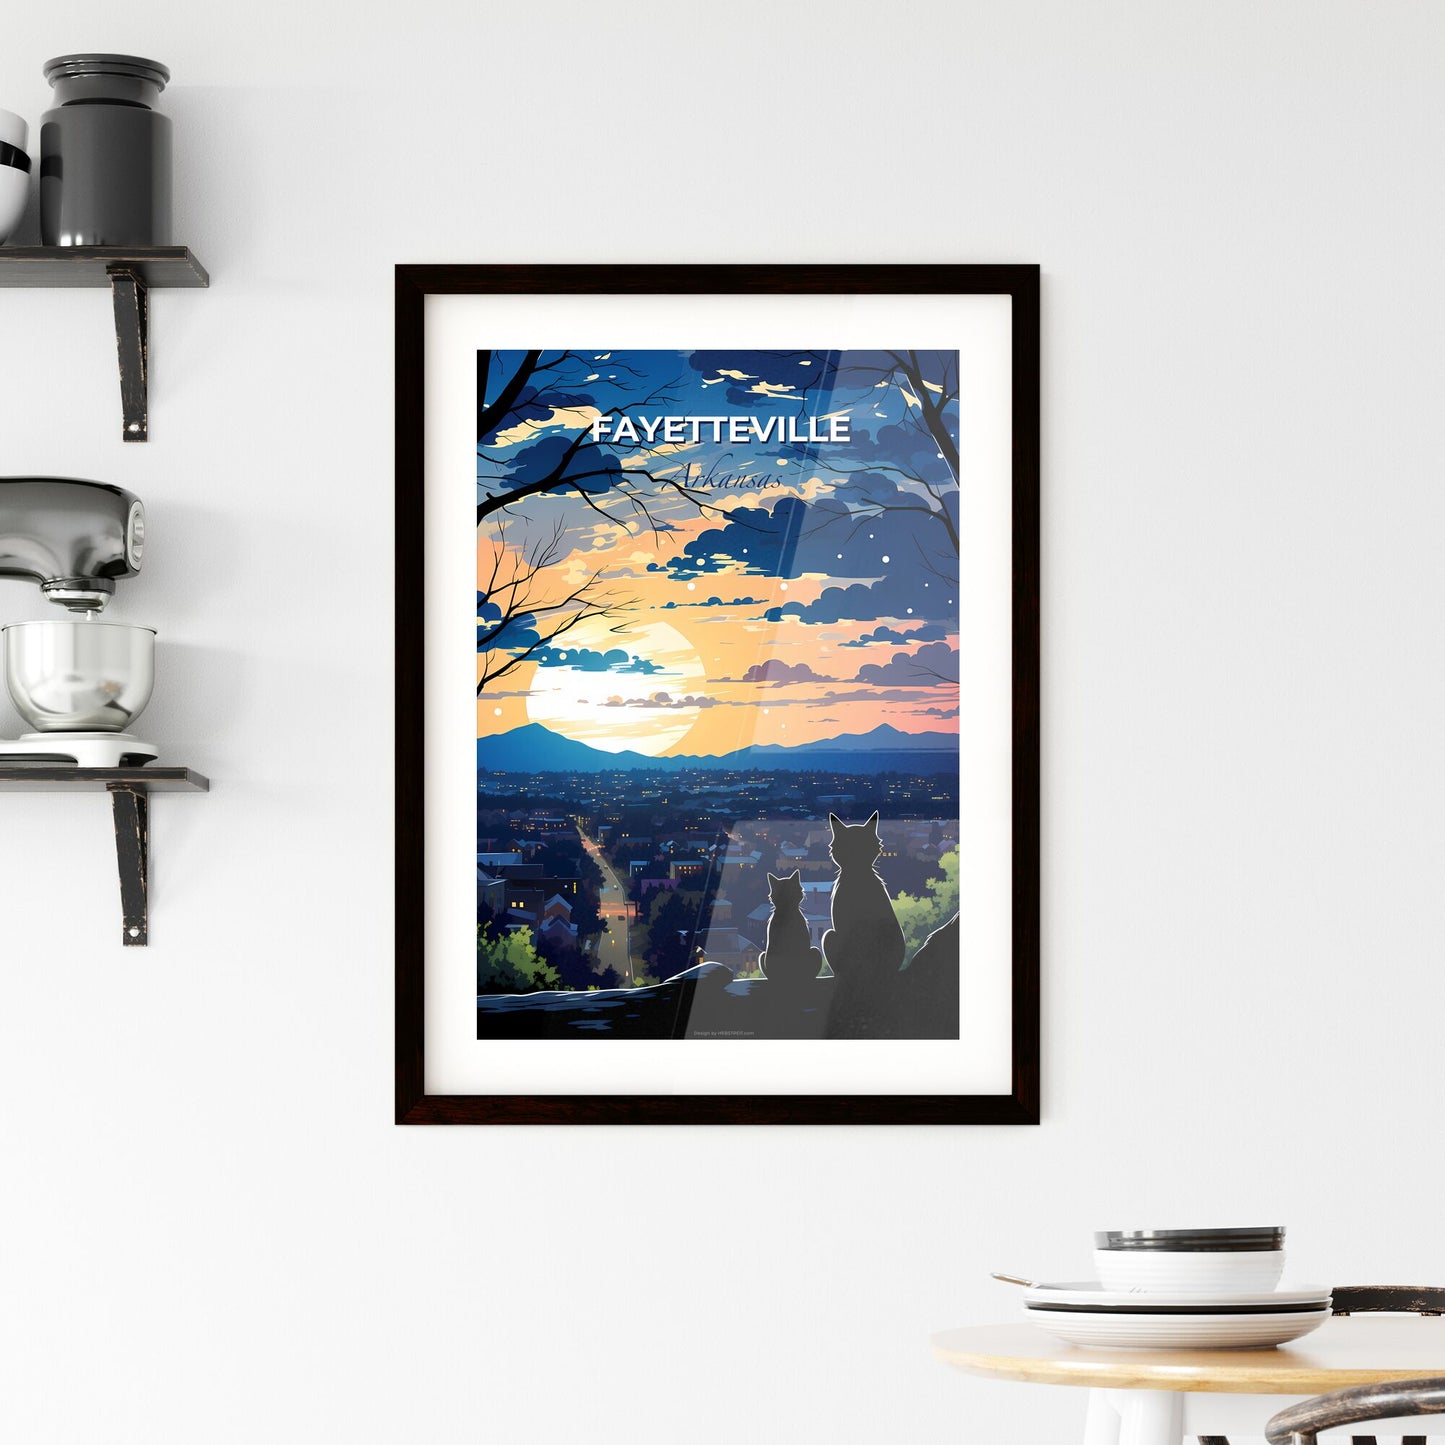 Fayetteville, Arkansas, A Poster of two cats sitting on a rock looking at a city Default Title